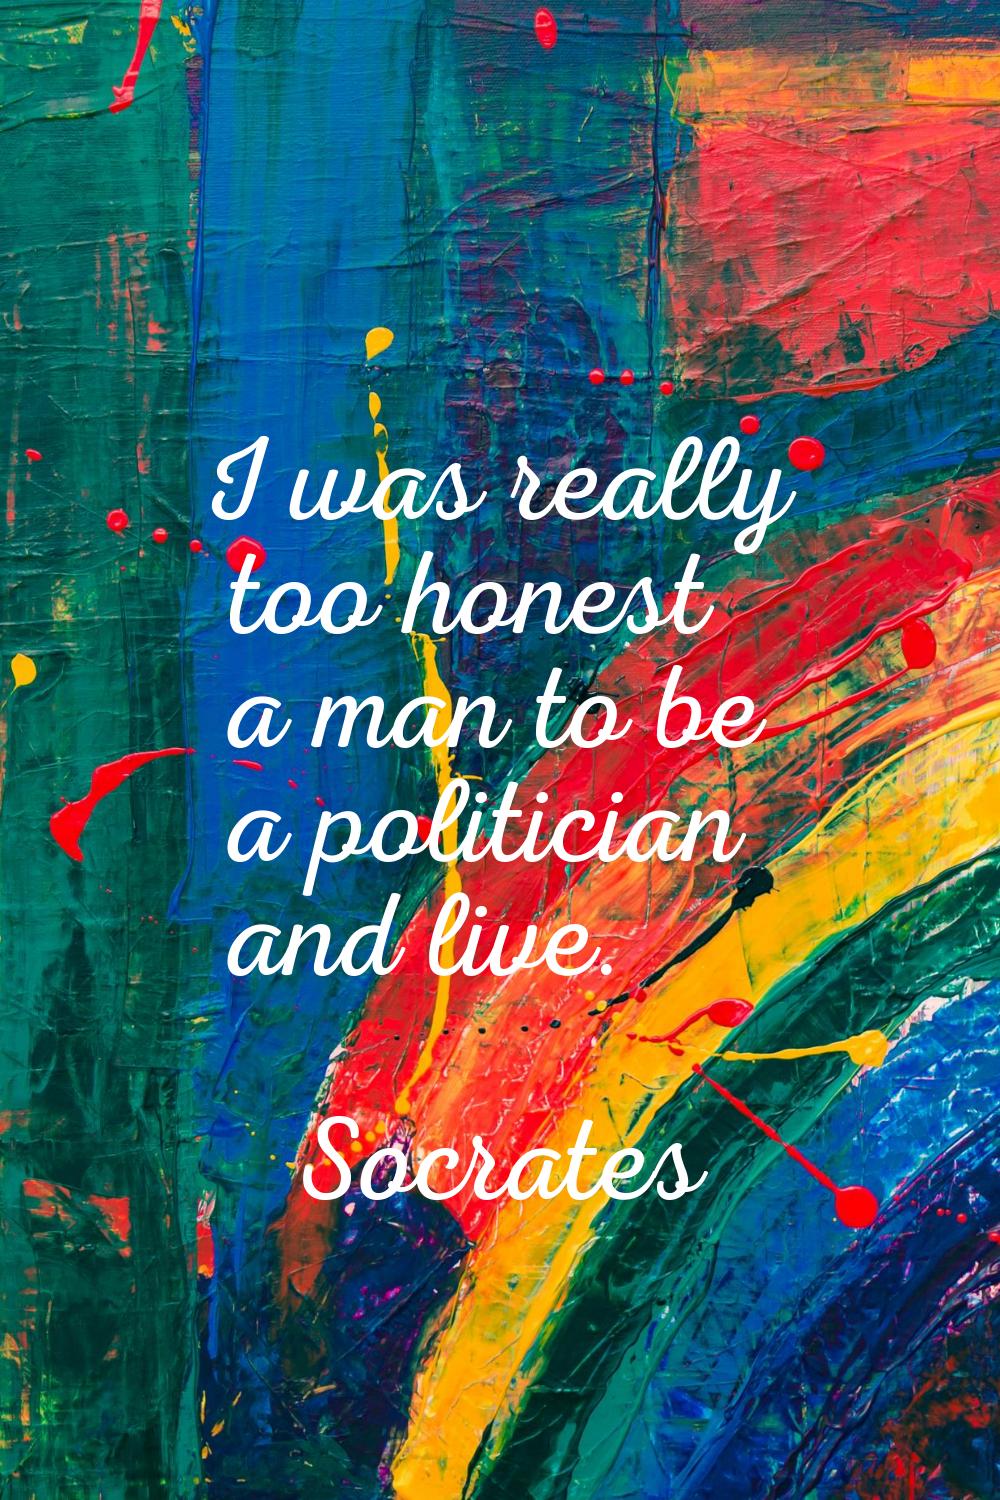 I was really too honest a man to be a politician and live.